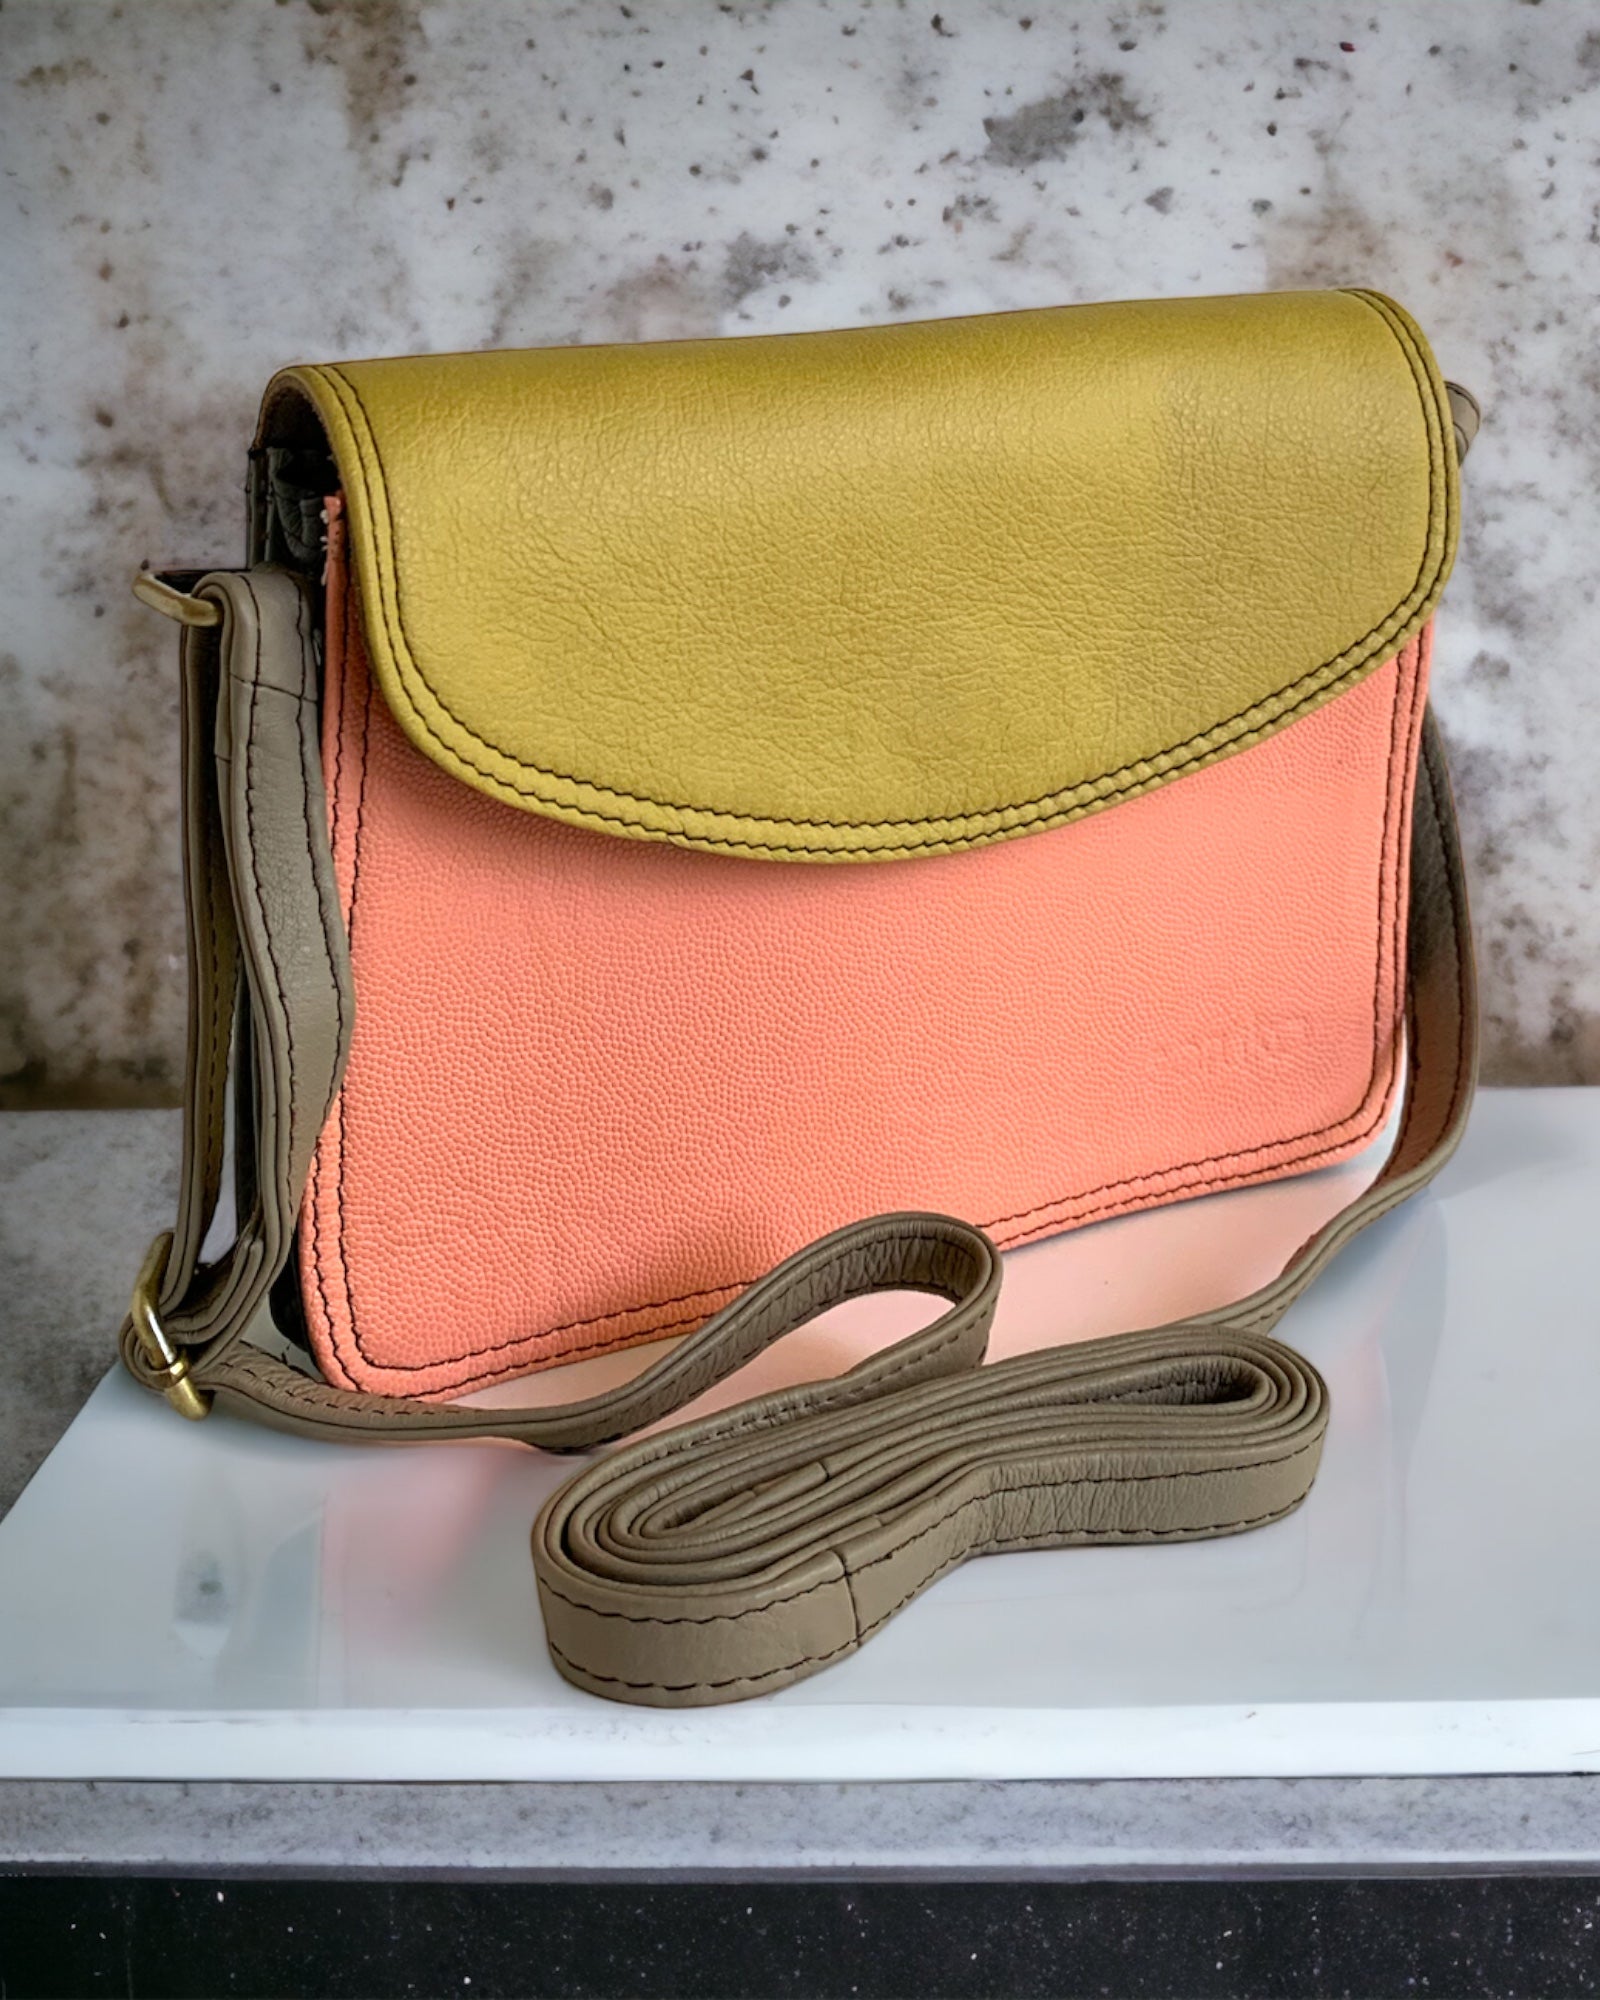 Soruka Beth Multicolored Leather Crossbody Satchel in Peach-colored front and Mustard-colored flap. The crossbody leather strap is adjustable and in grey color. Available at KADOU Boutique.